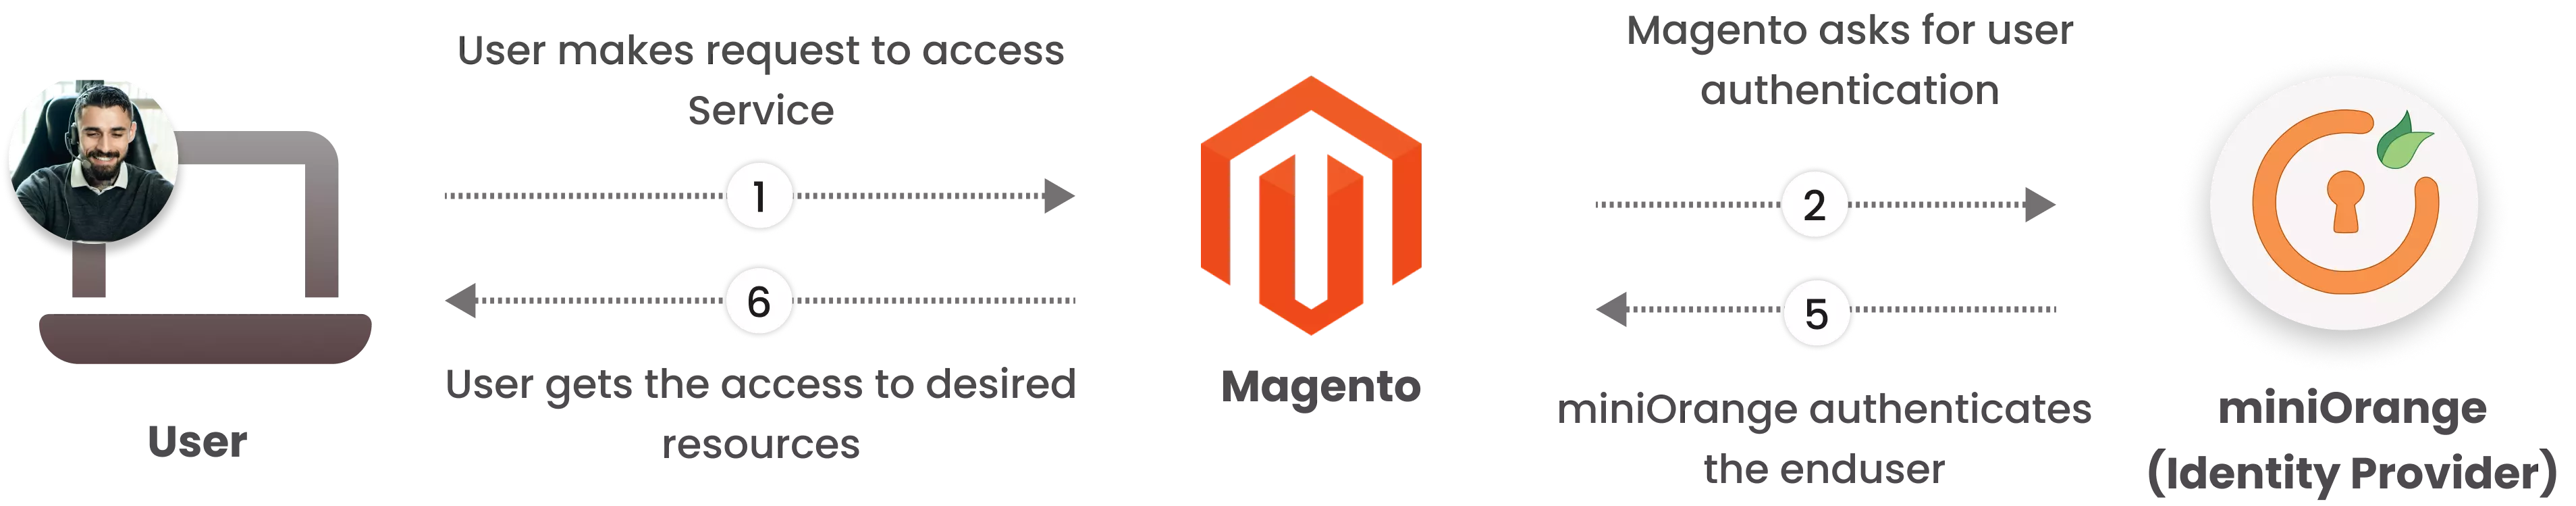 Magento as SP (Service Provider) Workflow